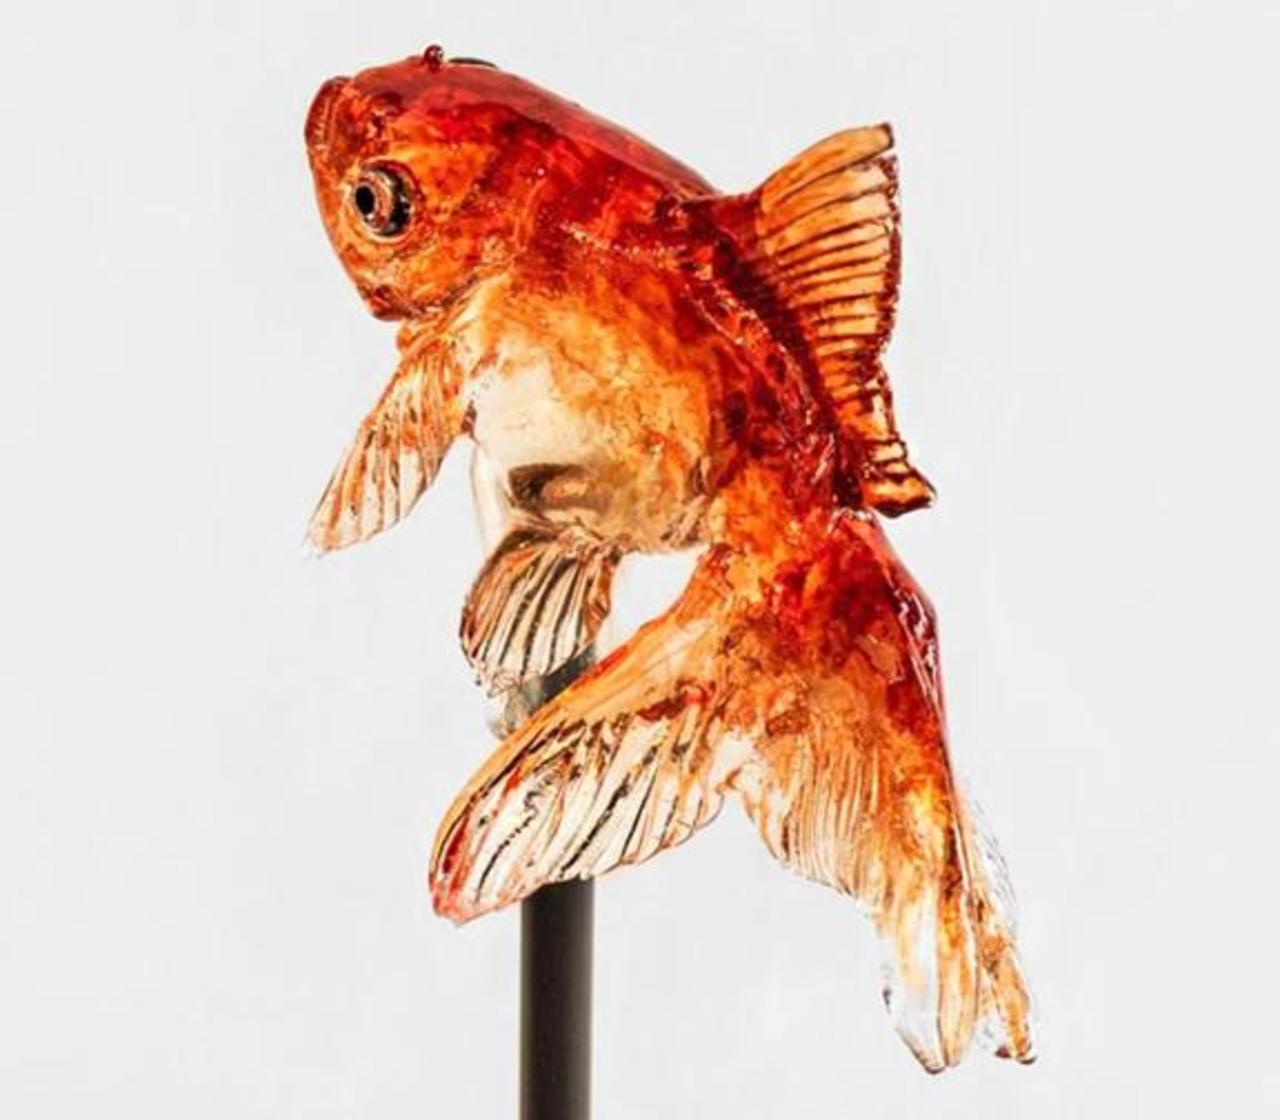 Shinri Tezuka's detailed sculptures are edible..Why haven't we known about this before! #Art #Sculpture #ShinriTezuka http://t.co/GZp9HFWoyW